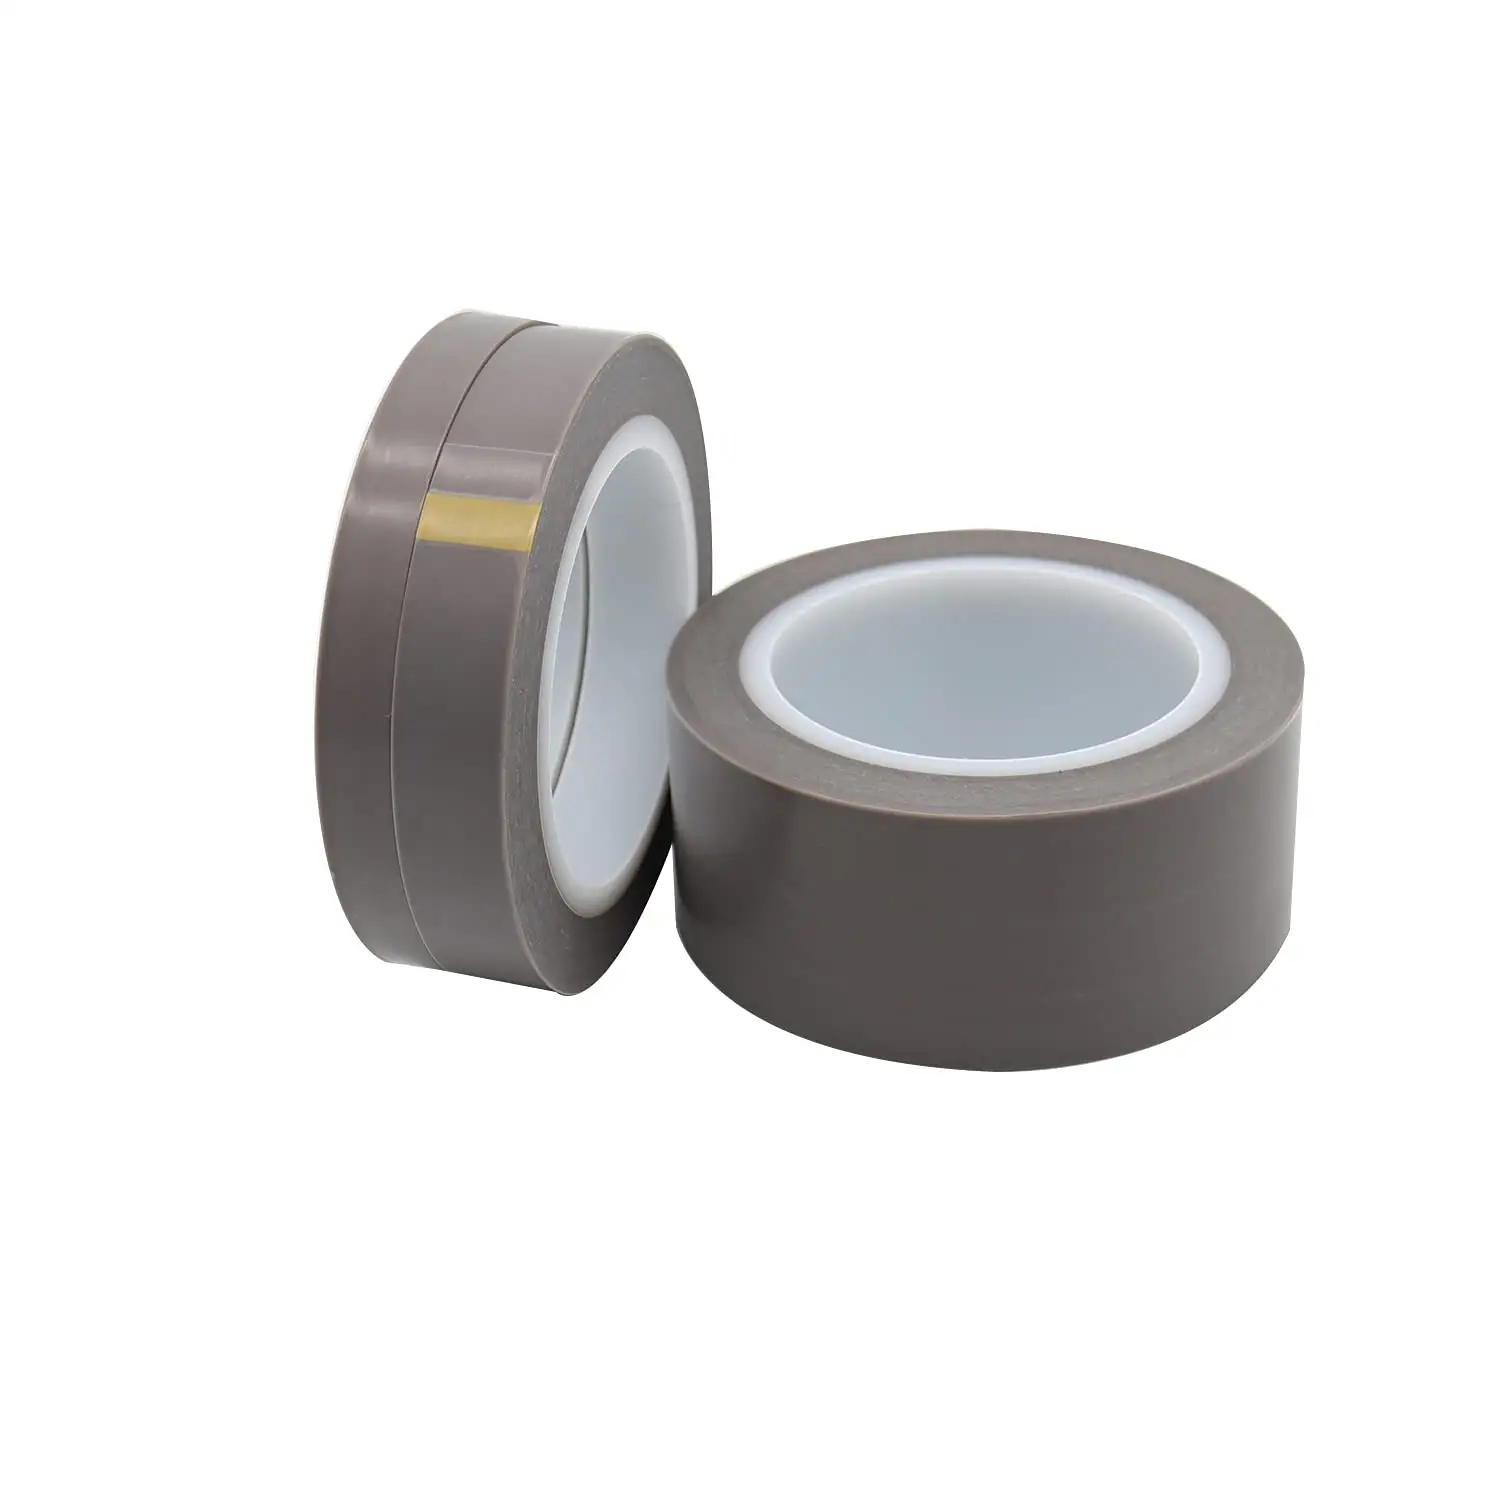 PTFE Tape Single Side Silicone Adhesive PTFE Film Tape Sheets, Heat Resistant Film Tape, 36 Yards